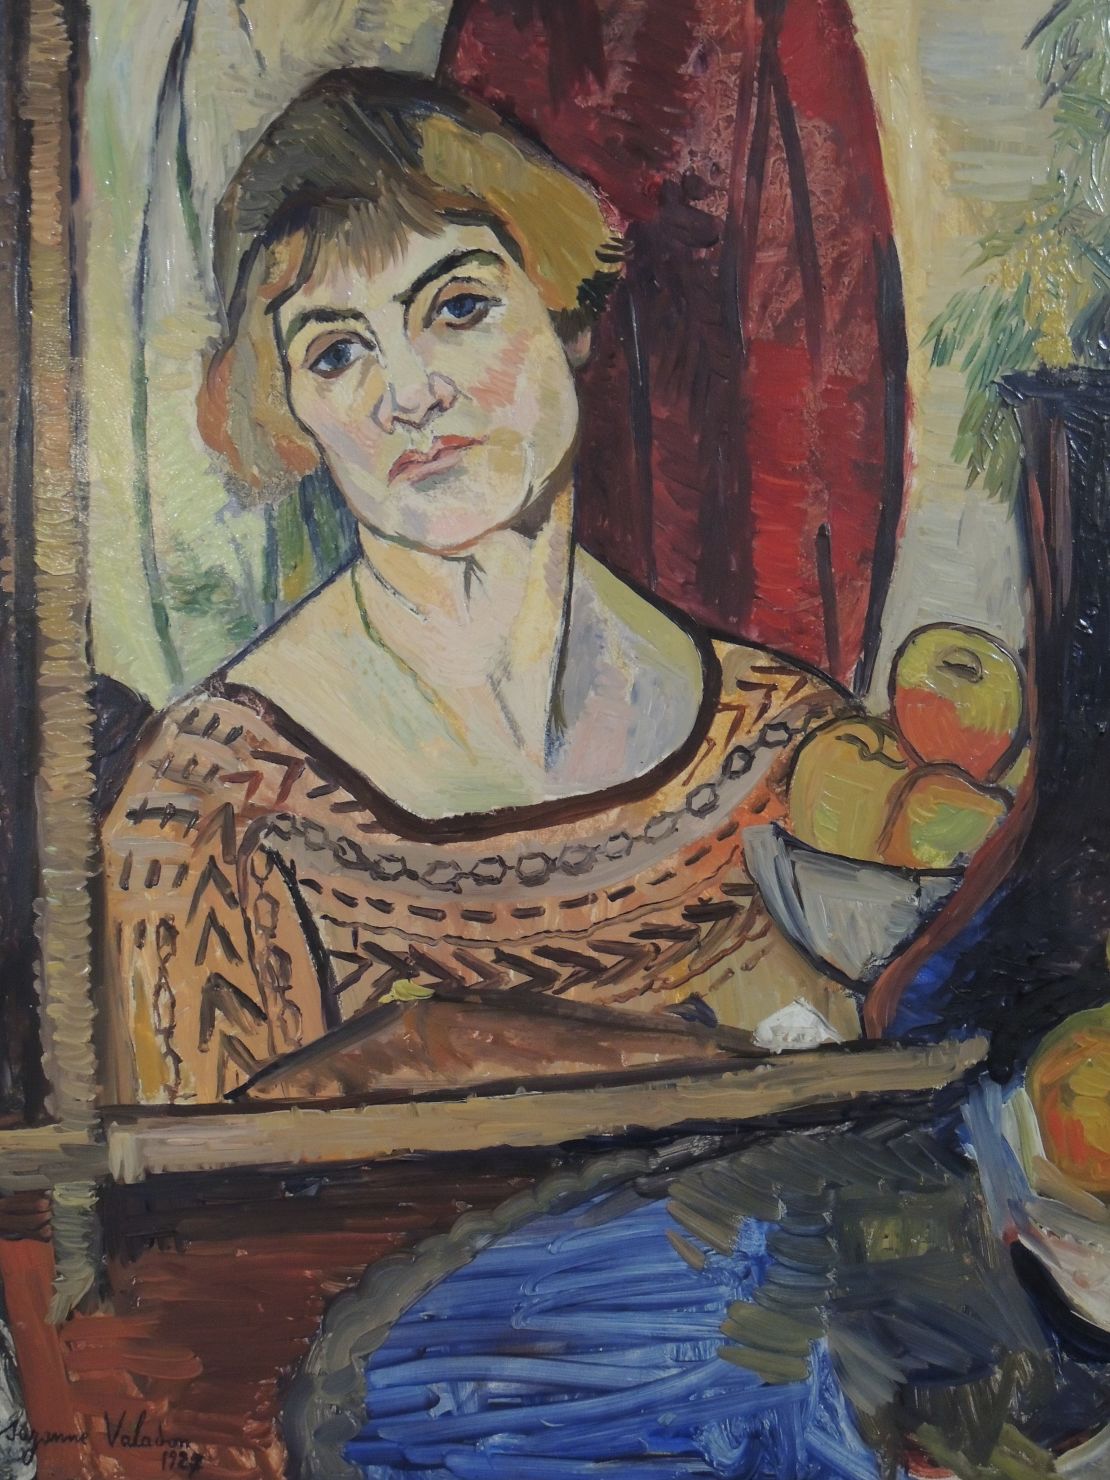 Valadon painted self-portraits as she aged, eschewing idealized views of herself. Pictured: "Self-Portrait," 1927.